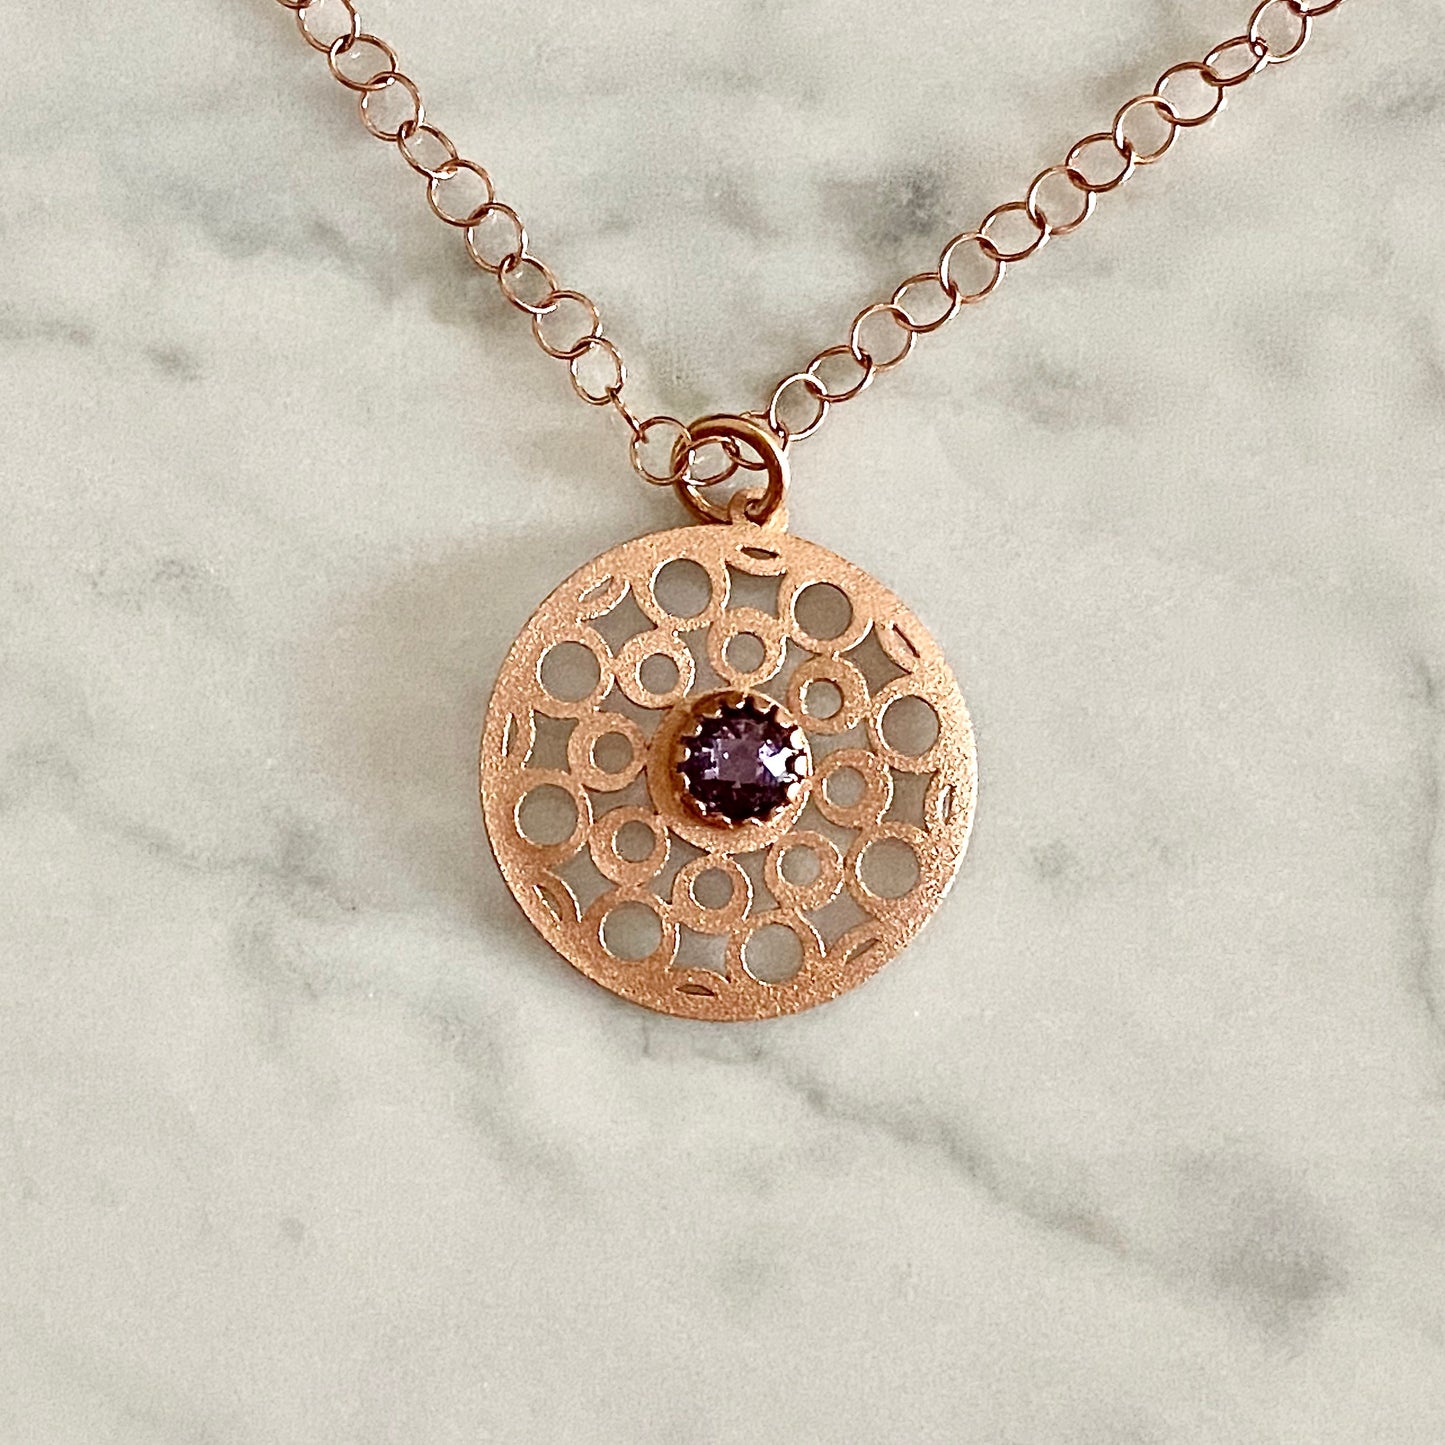 Amethyst & Rose-tone Open Circles Pendant on Adjustable 18" Round Link Chain with Lobster Clasp